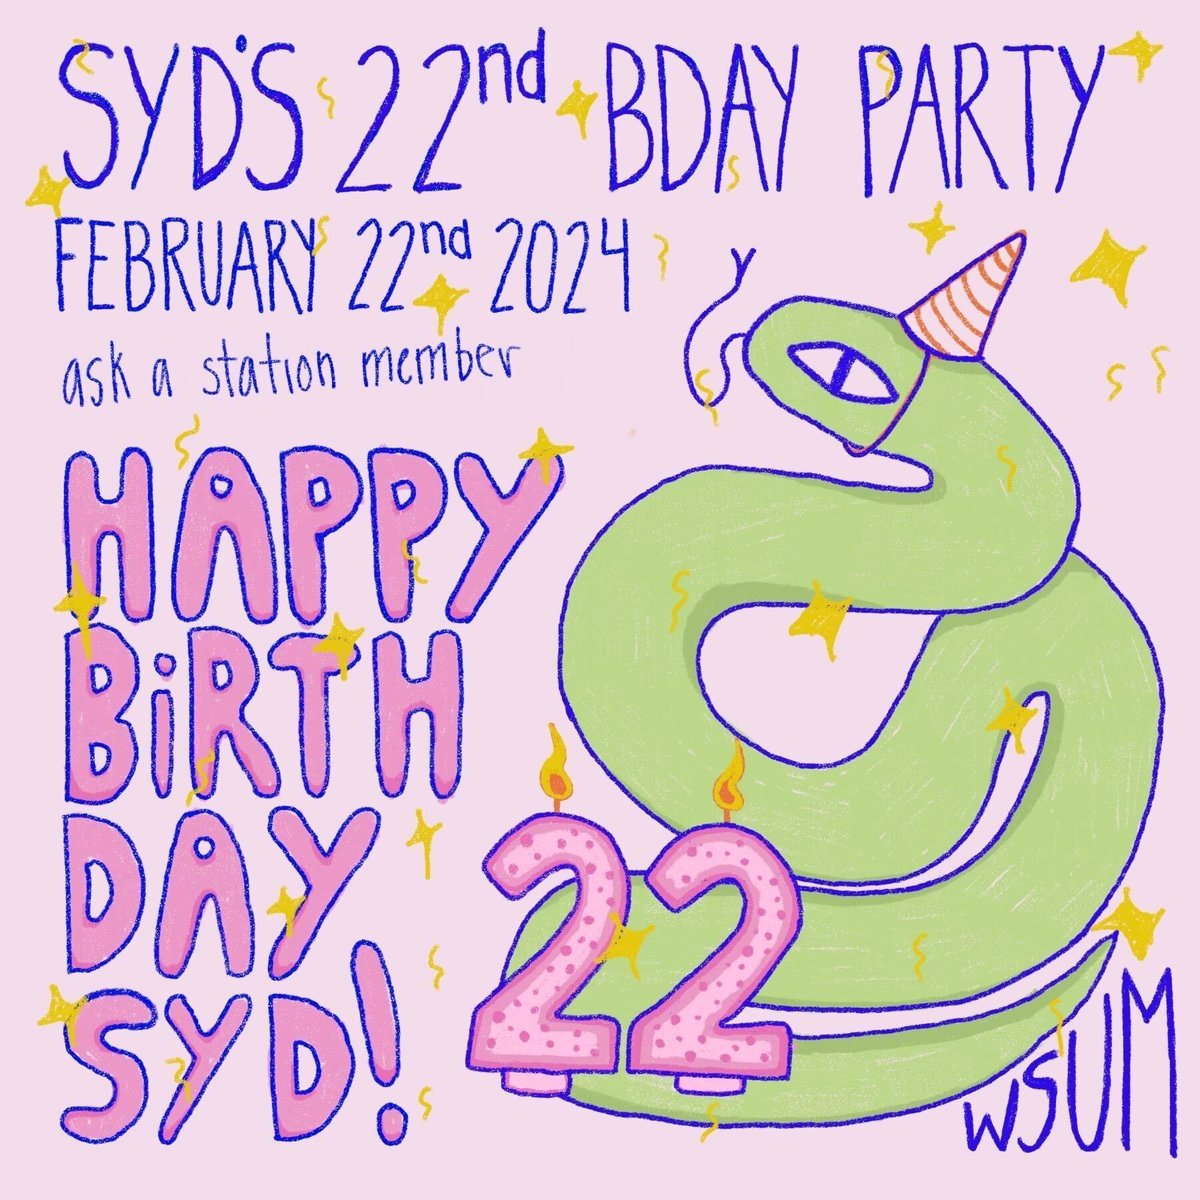 Join us for WSUM’s 22nd birthday, all while congratulating Syd as they graduate and celebrate their momentous milestone🎓🐍🎂 Let us know your favorite station memory from our history down below!